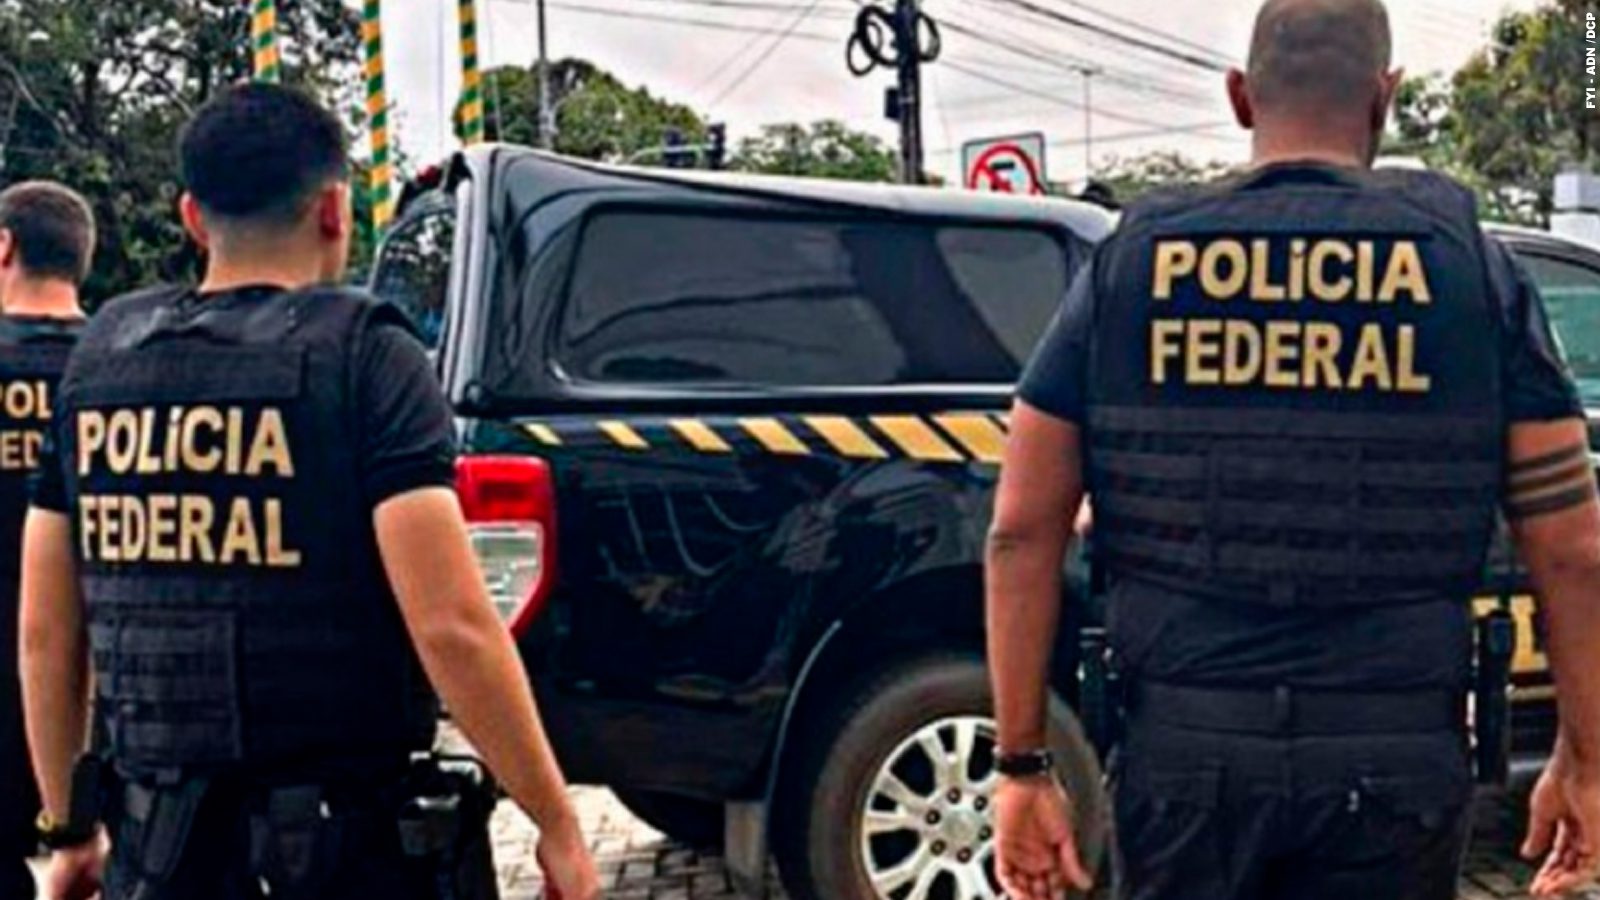 Federal Police arrest two suspects in São Paulo for planning terrorist attacks in Brazil